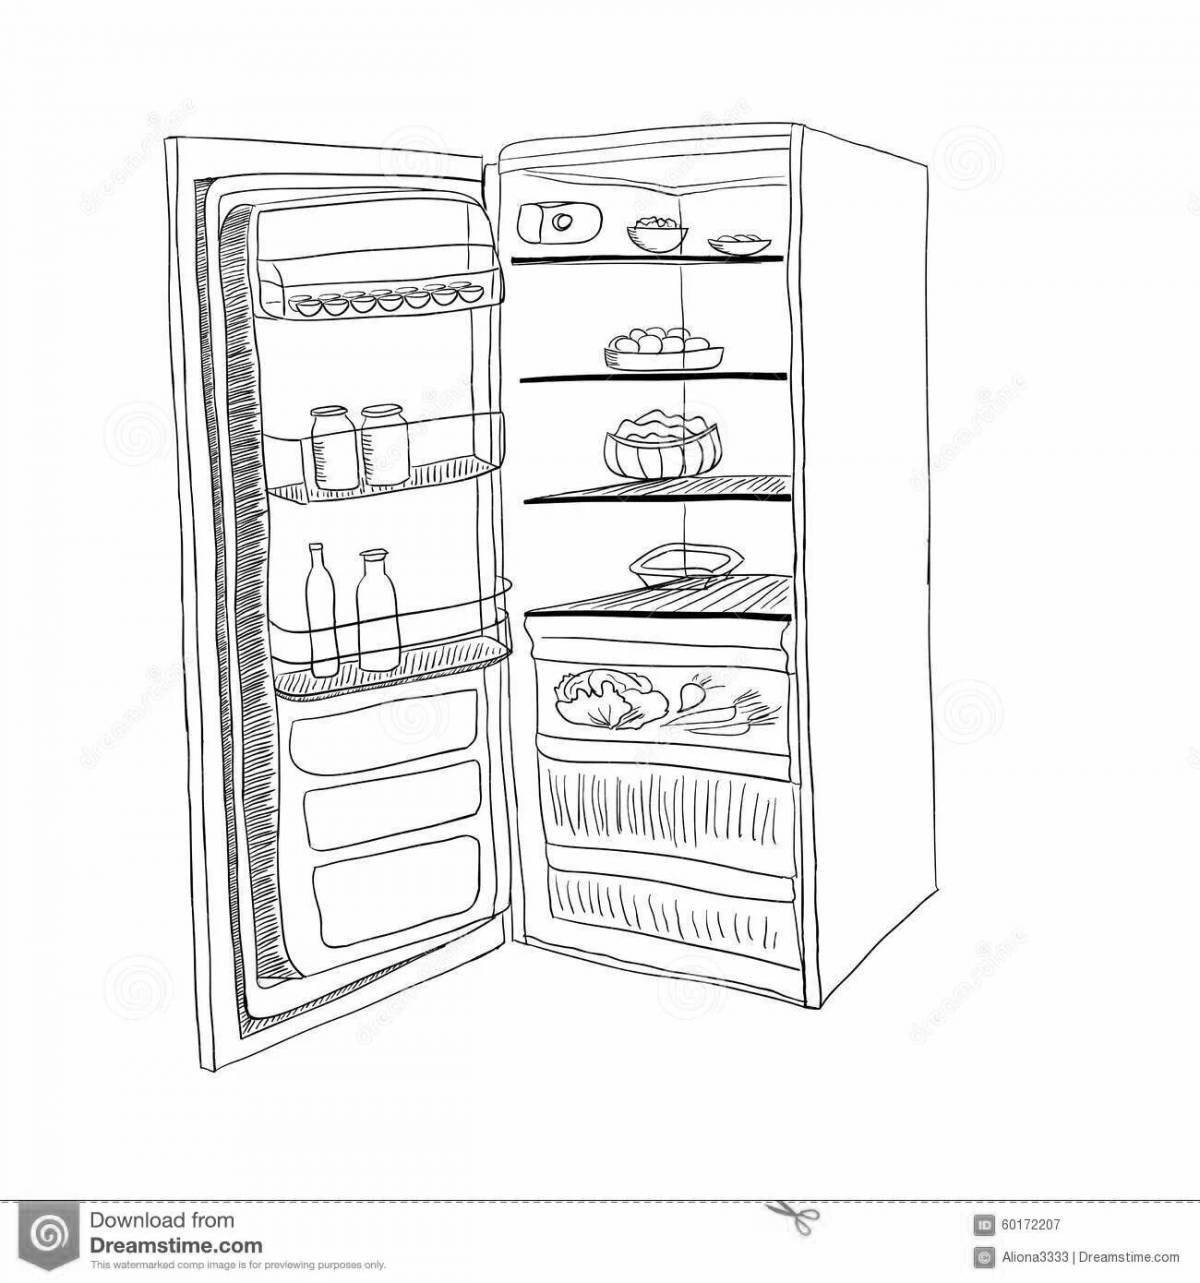 Radiant refrigerator open coloring page